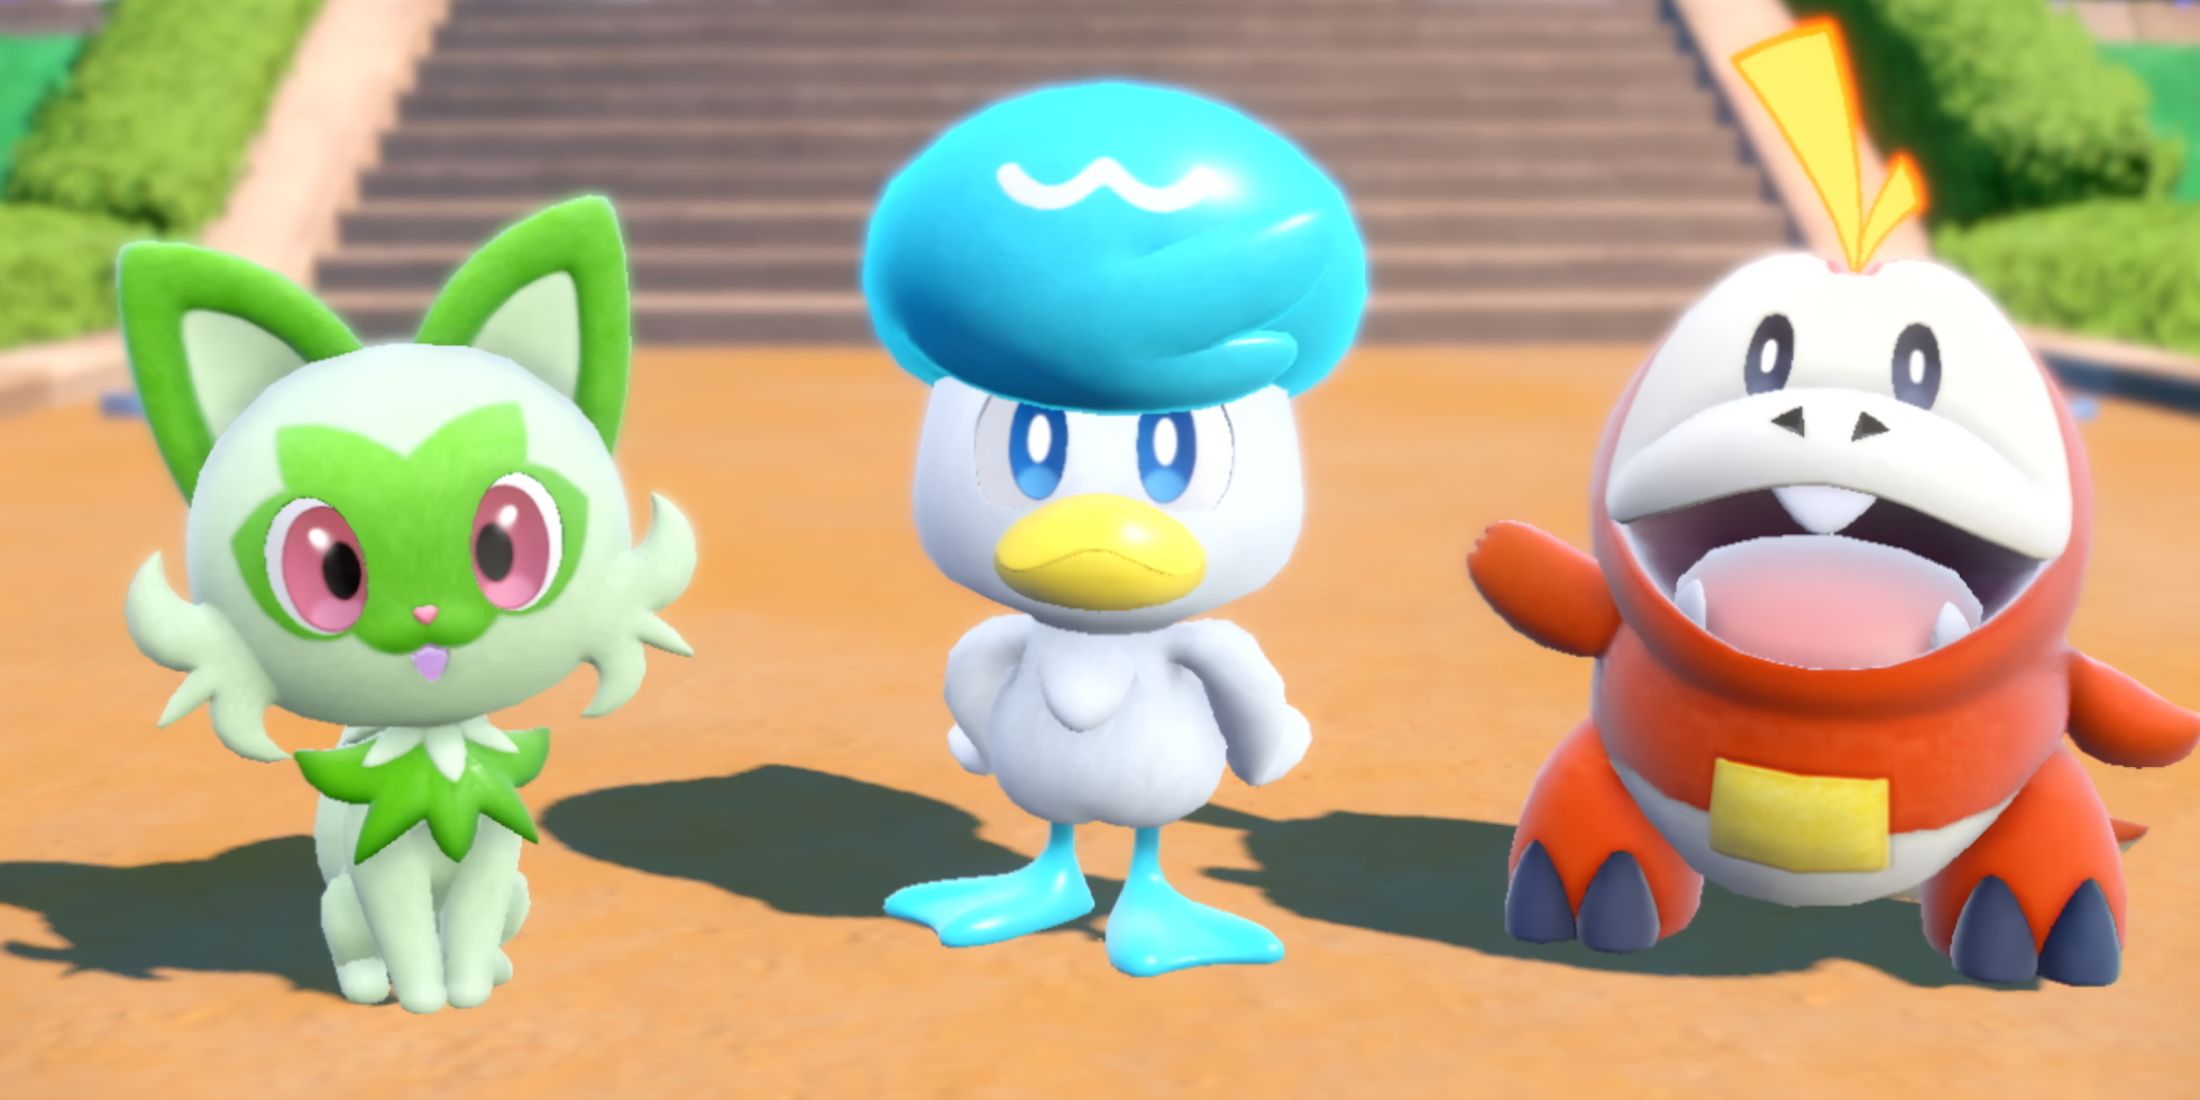 The three Starter Pokemon from Pokemon Scarlet and Violet: Sprigatito, Fuecoco, and Quaxly.